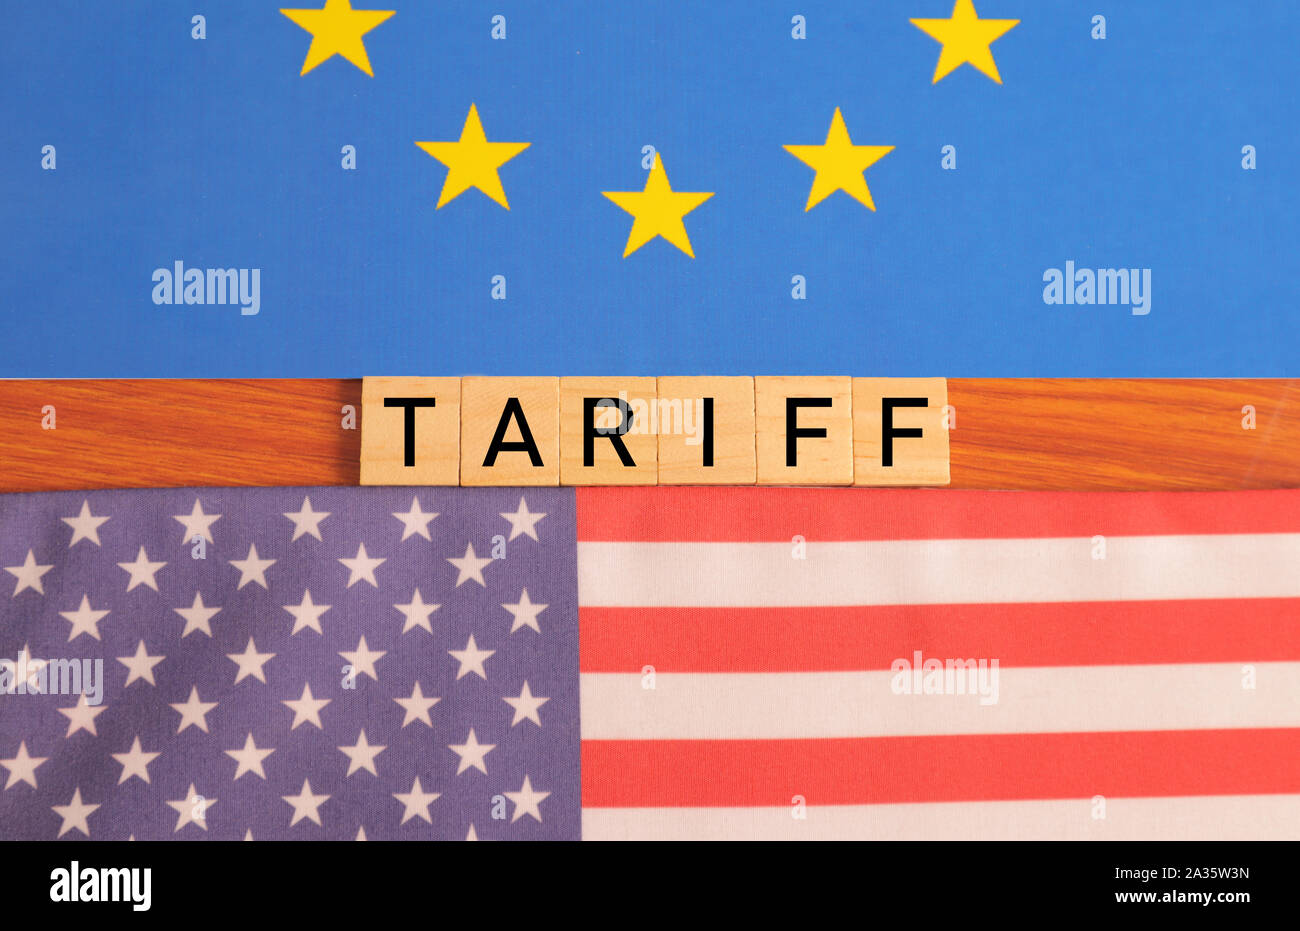 Concept of Bilateral relations and united states of america or USA tariff on EU or european union showing with flags Stock Photo